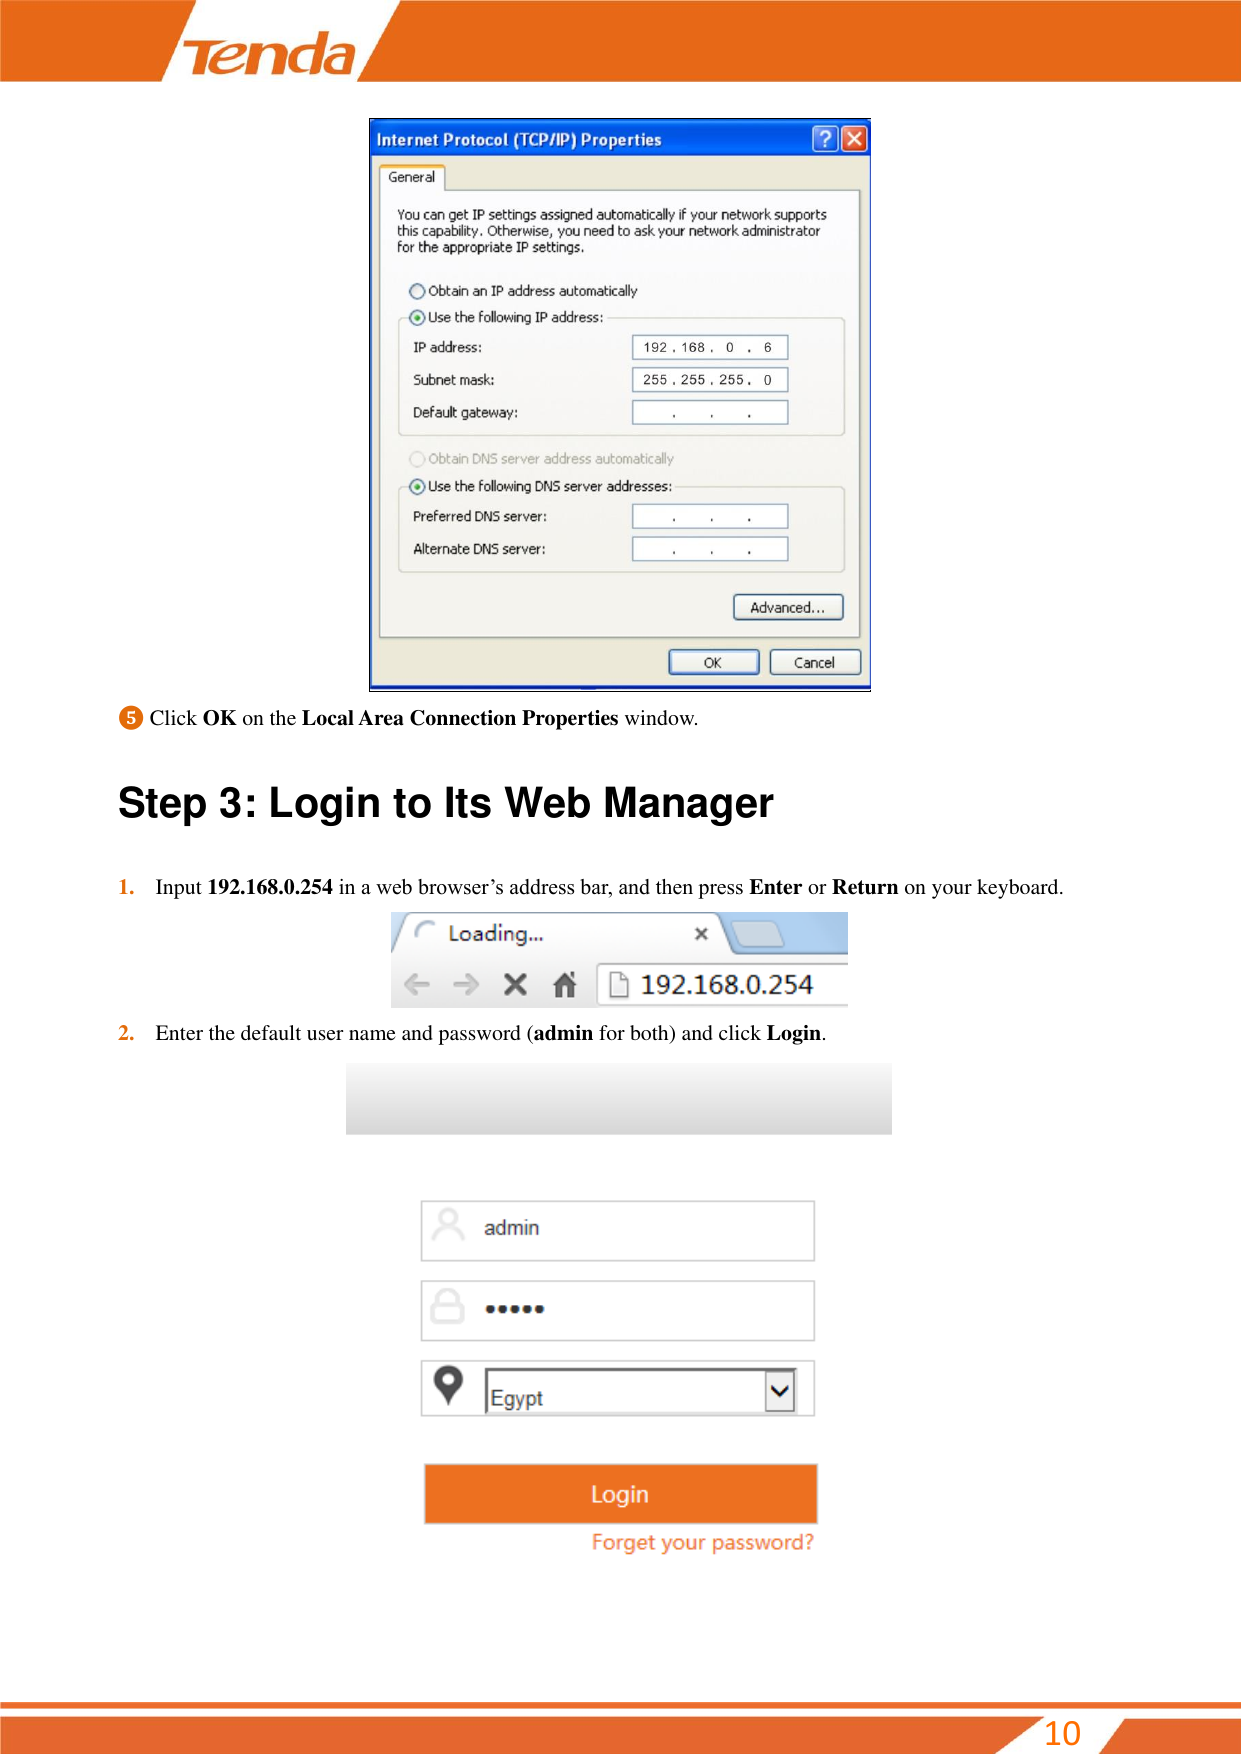         10  ❺ Click OK on the Local Area Connection Properties window. Step 3: Login to Its Web Manager   1. Input 192.168.0.254 in a web browser’s address bar, and then press Enter or Return on your keyboard.  2. Enter the default user name and password (admin for both) and click Login.  